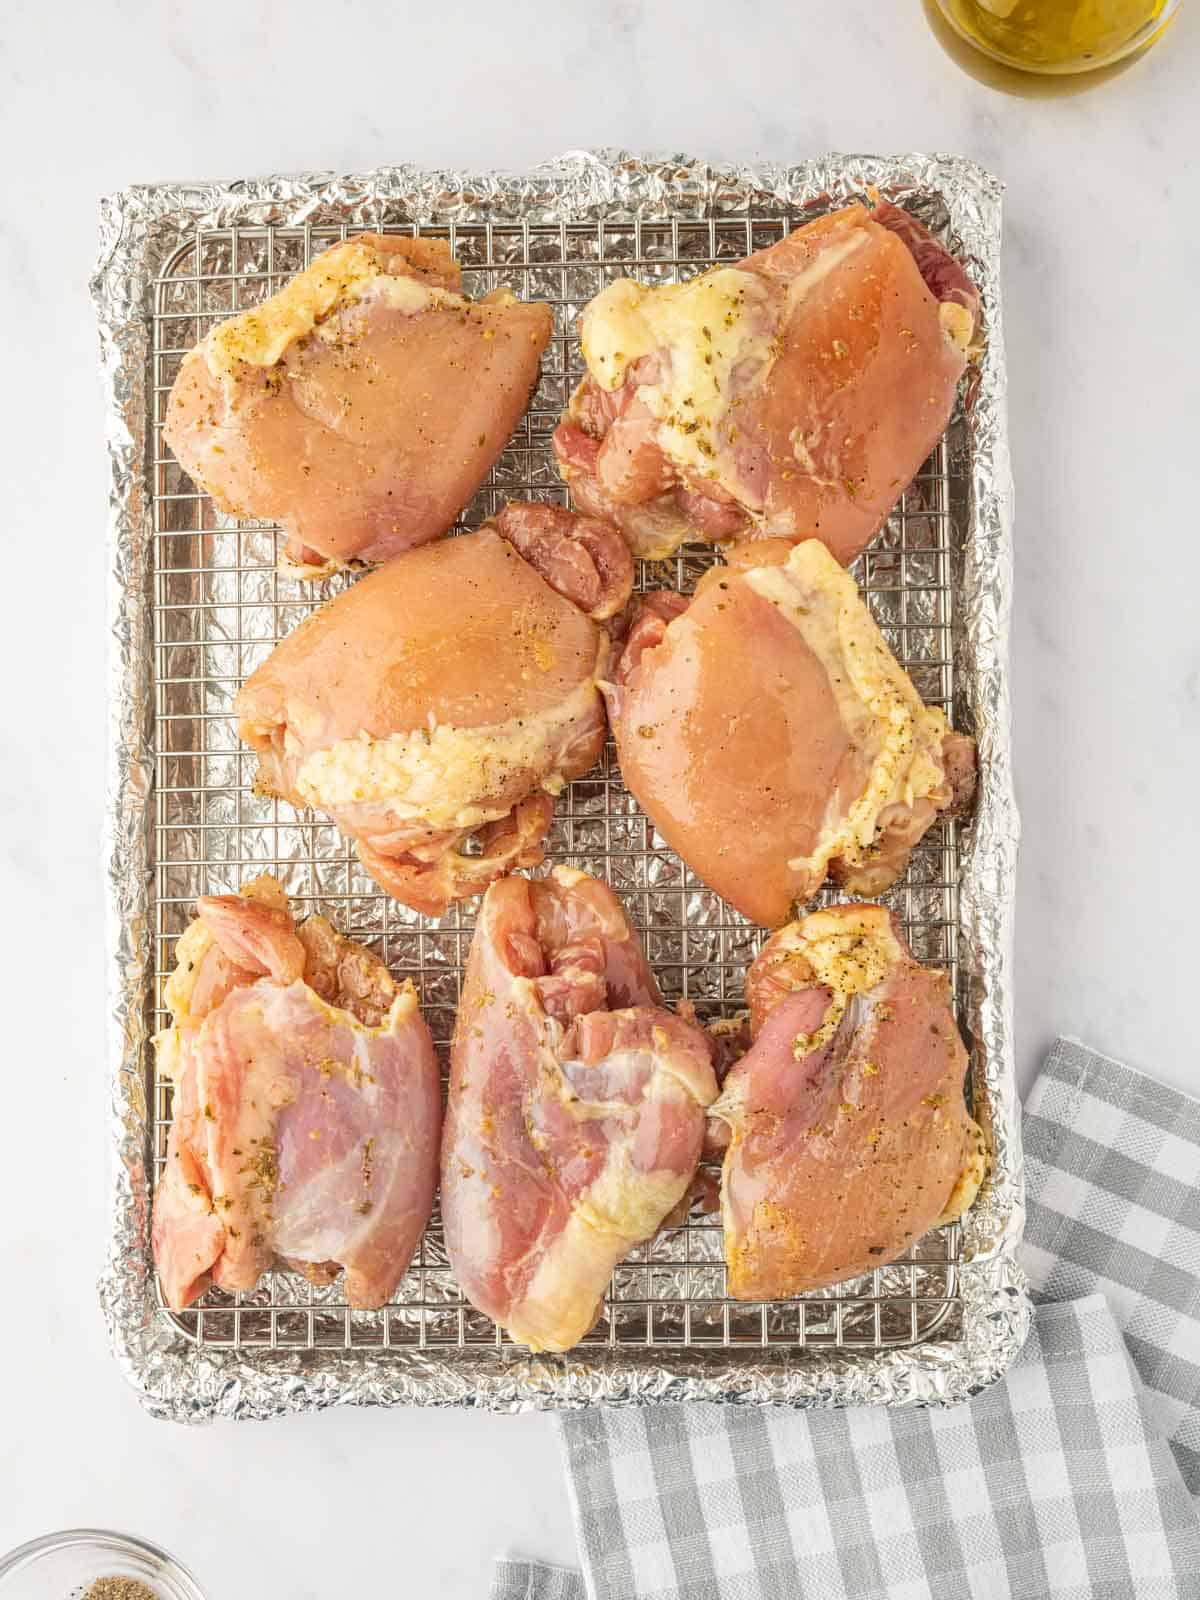 Chicken thighs are arranged on a prepared baking rack.